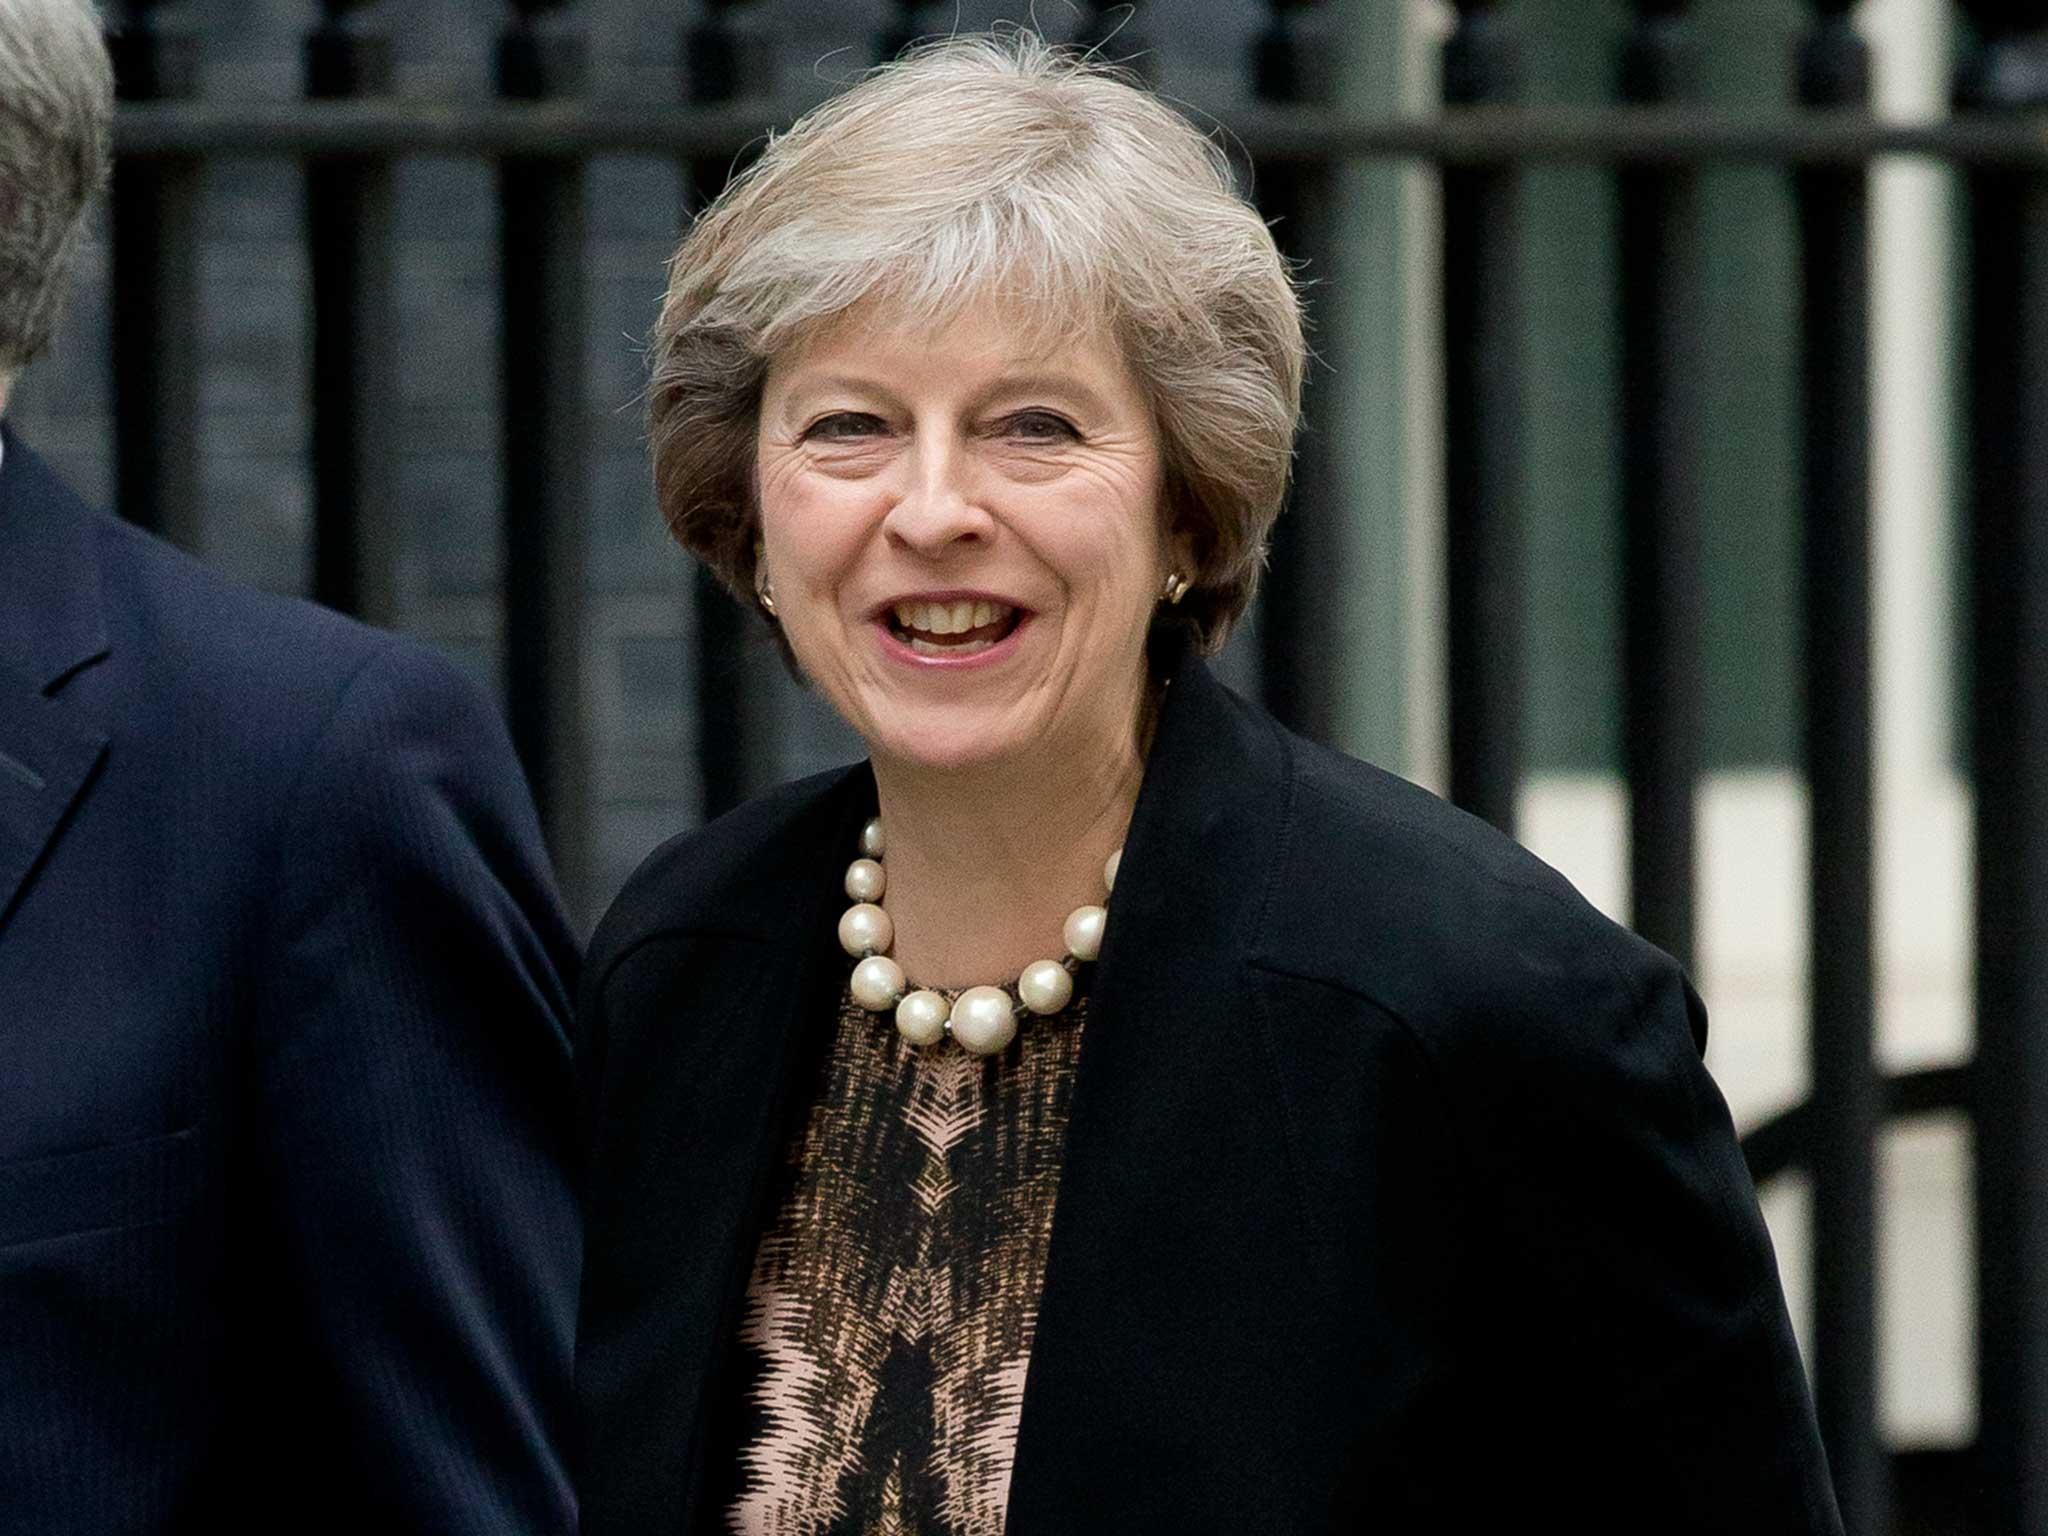 Theresa May arrives for a cabinet meeting at 10 Downing Street in London